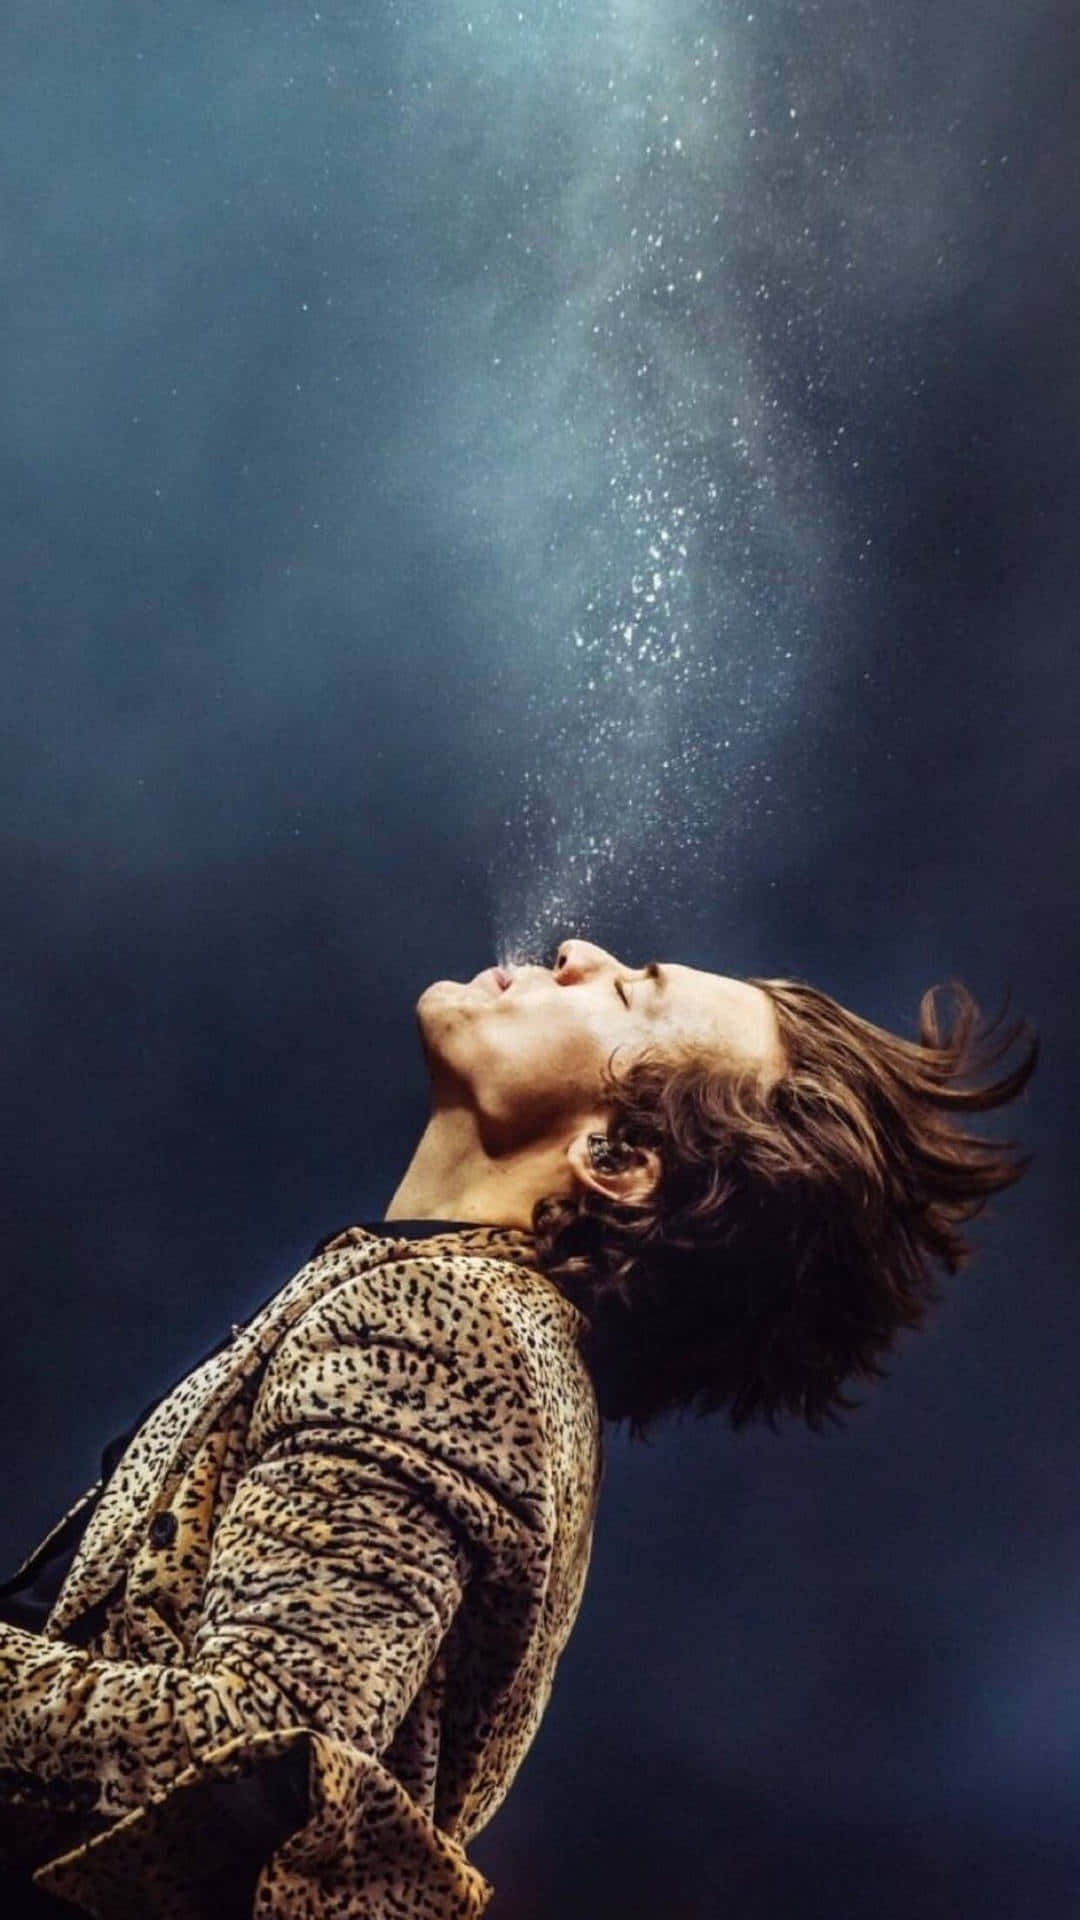 Harry Styles Tumblr 2020 Wallpapers - Wallpaper Cave